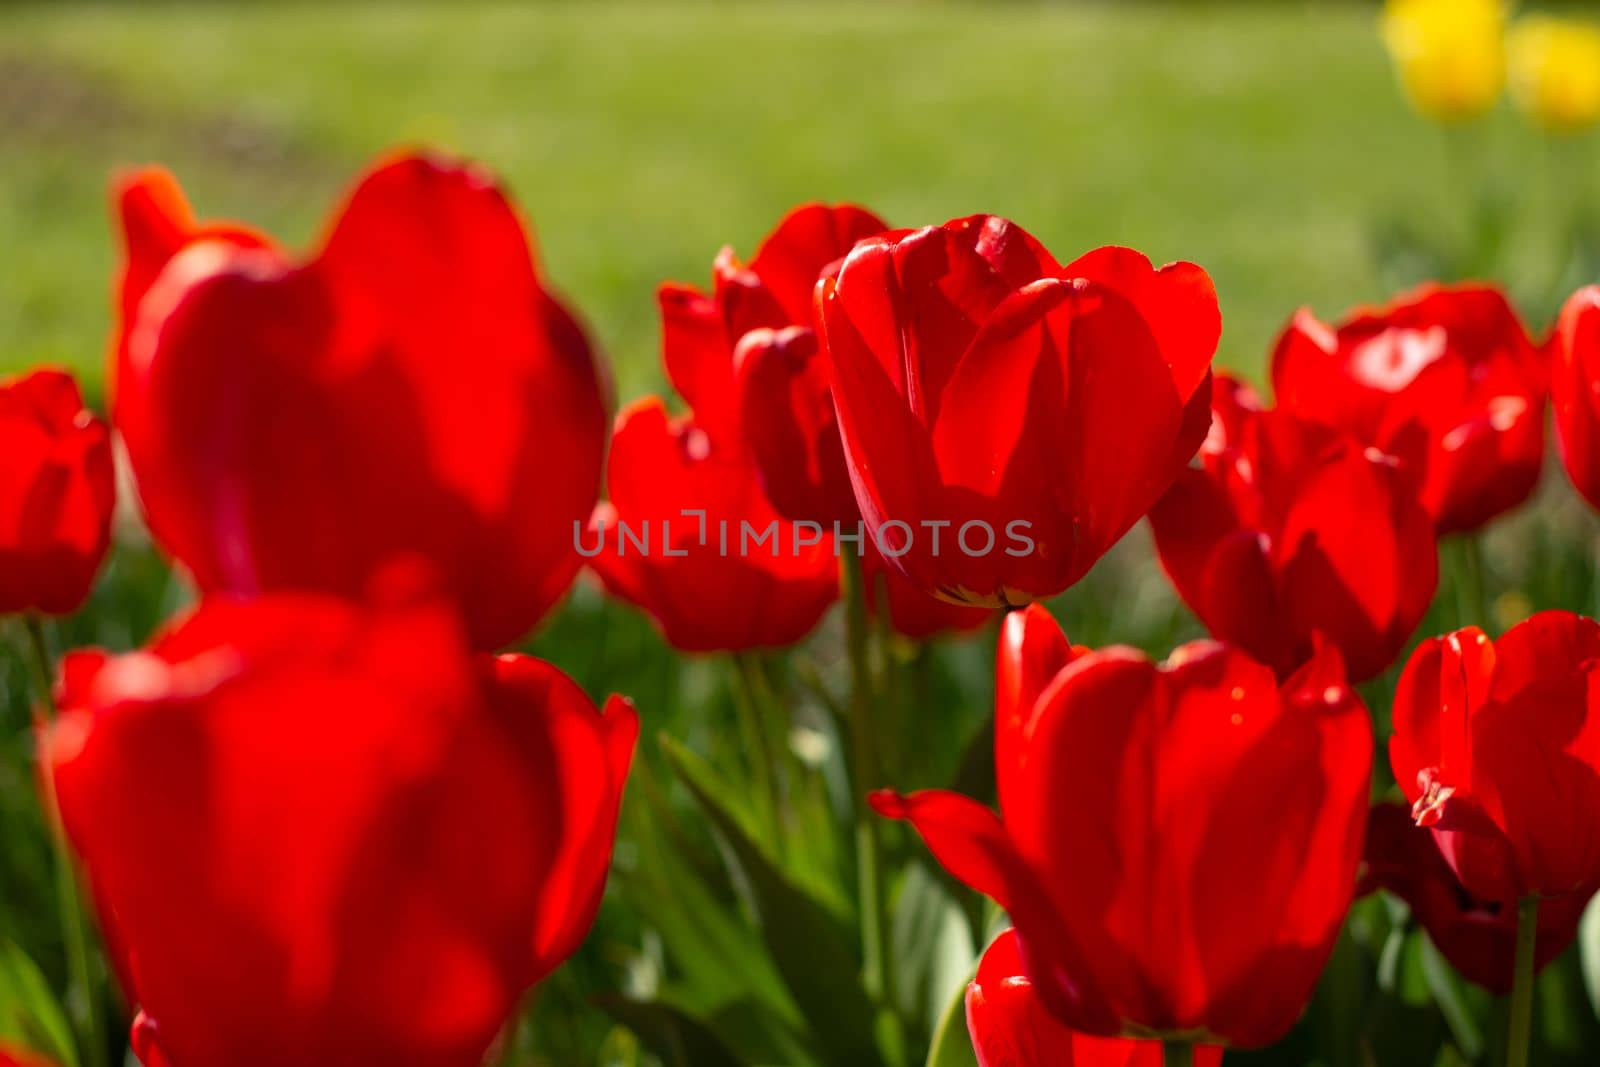 Tulip flowers in red blossom nearby, beautiful natural background by scasal15